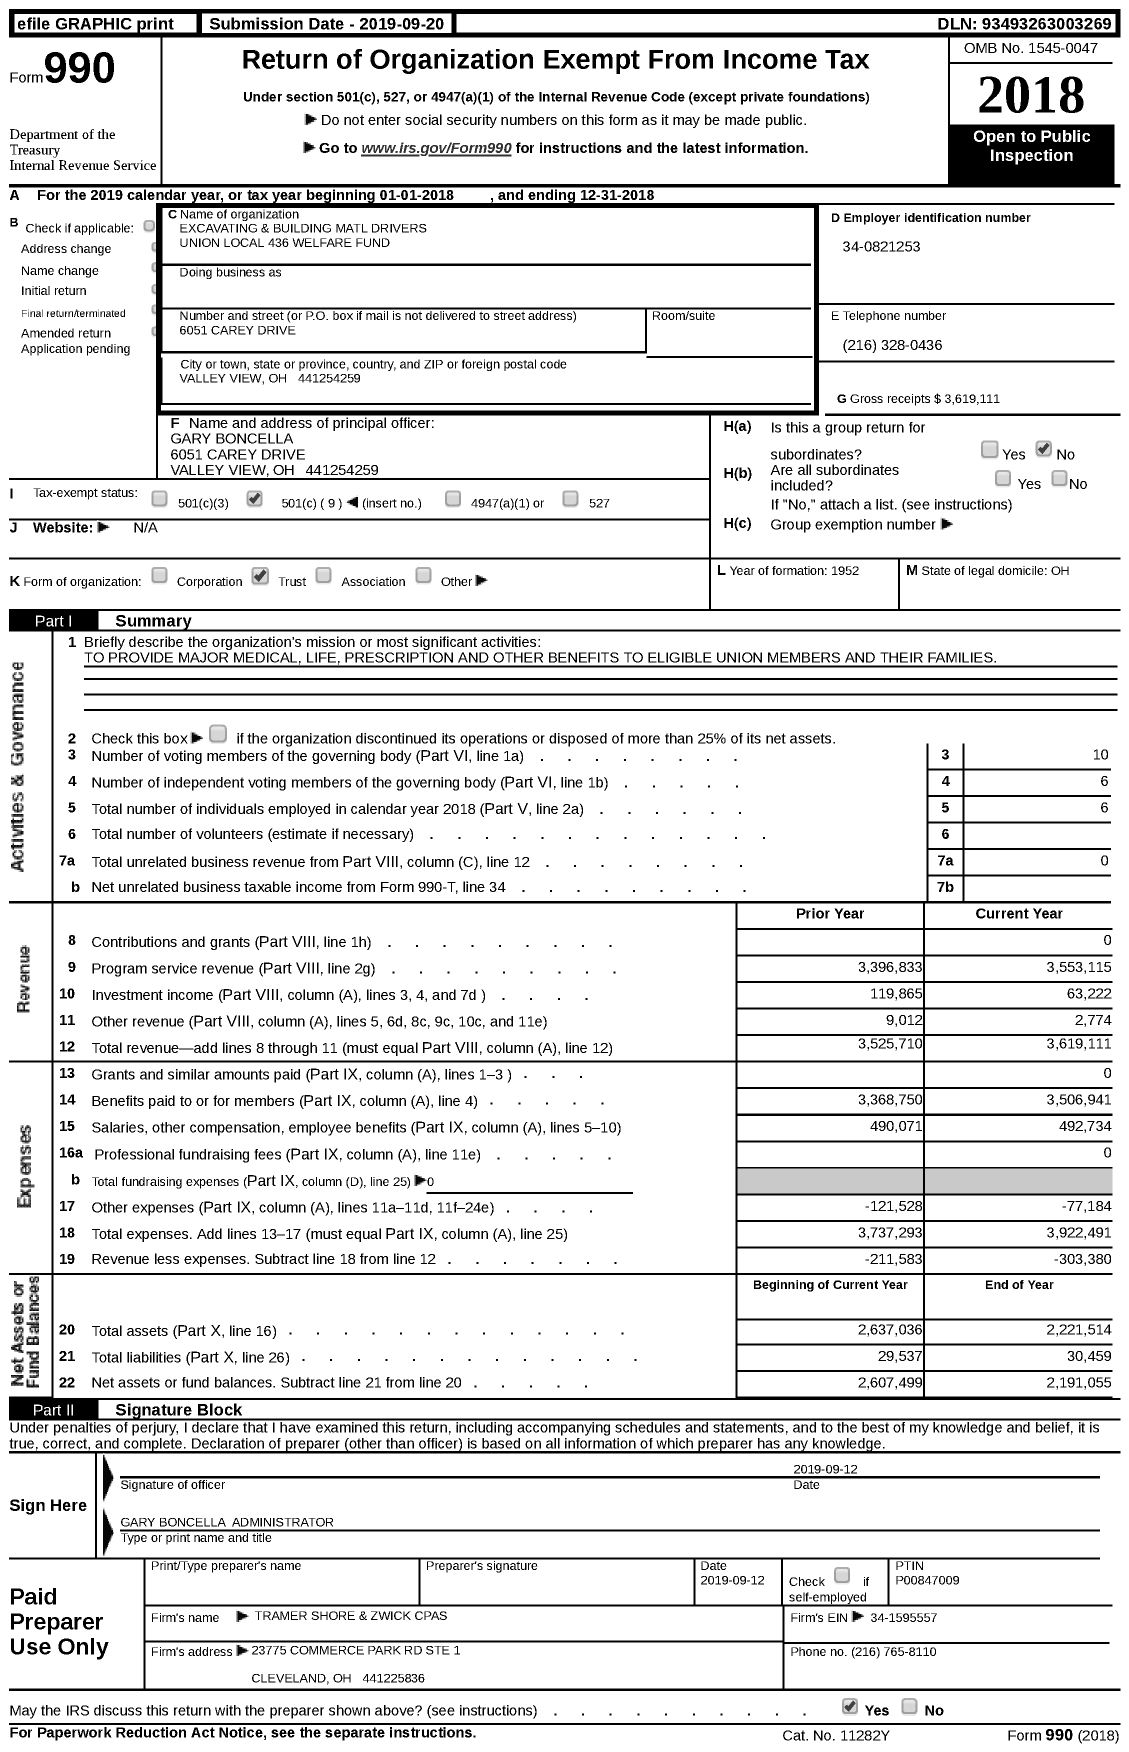 Image of first page of 2018 Form 990 for Excavating and Building Matl Drivers Union Local 436 Welfare Fund